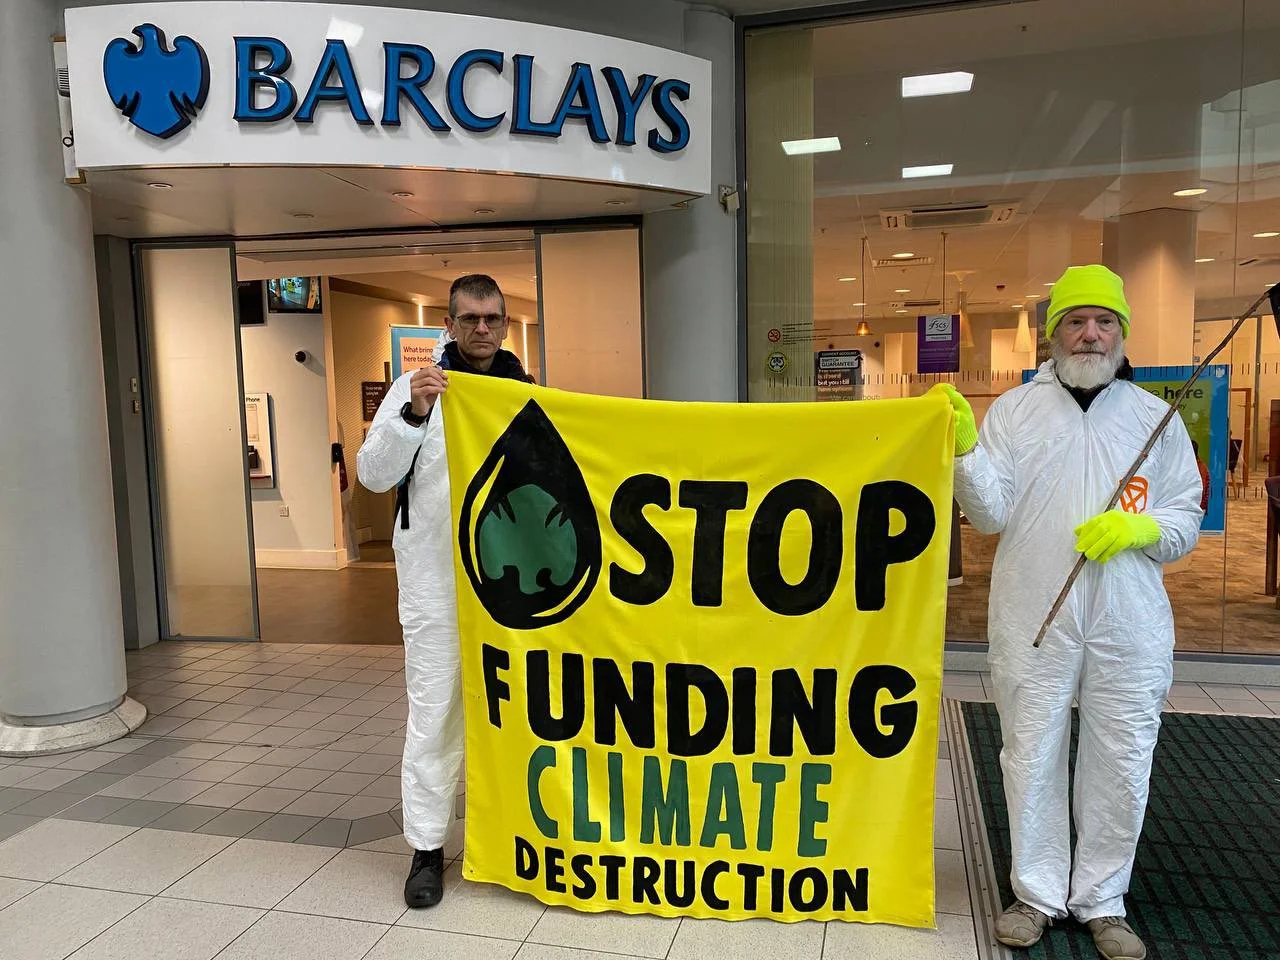 Extinction Rebellion to protest against Barclays’ fossil fuel investments